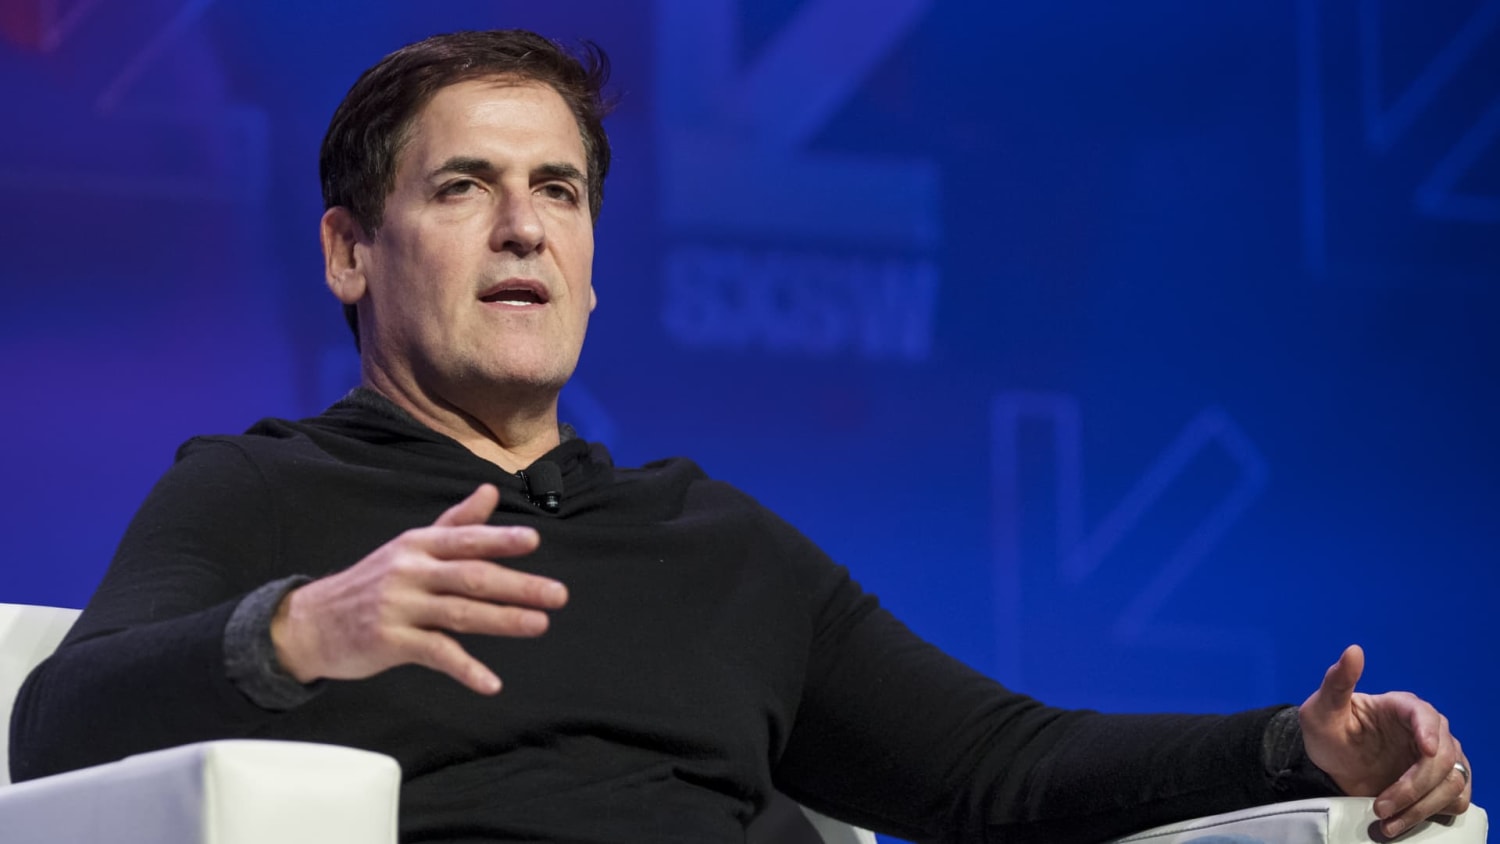 Mark Cuban, Bill Gates and others on what to study if you want a high-paying, robot-resistant job in the future